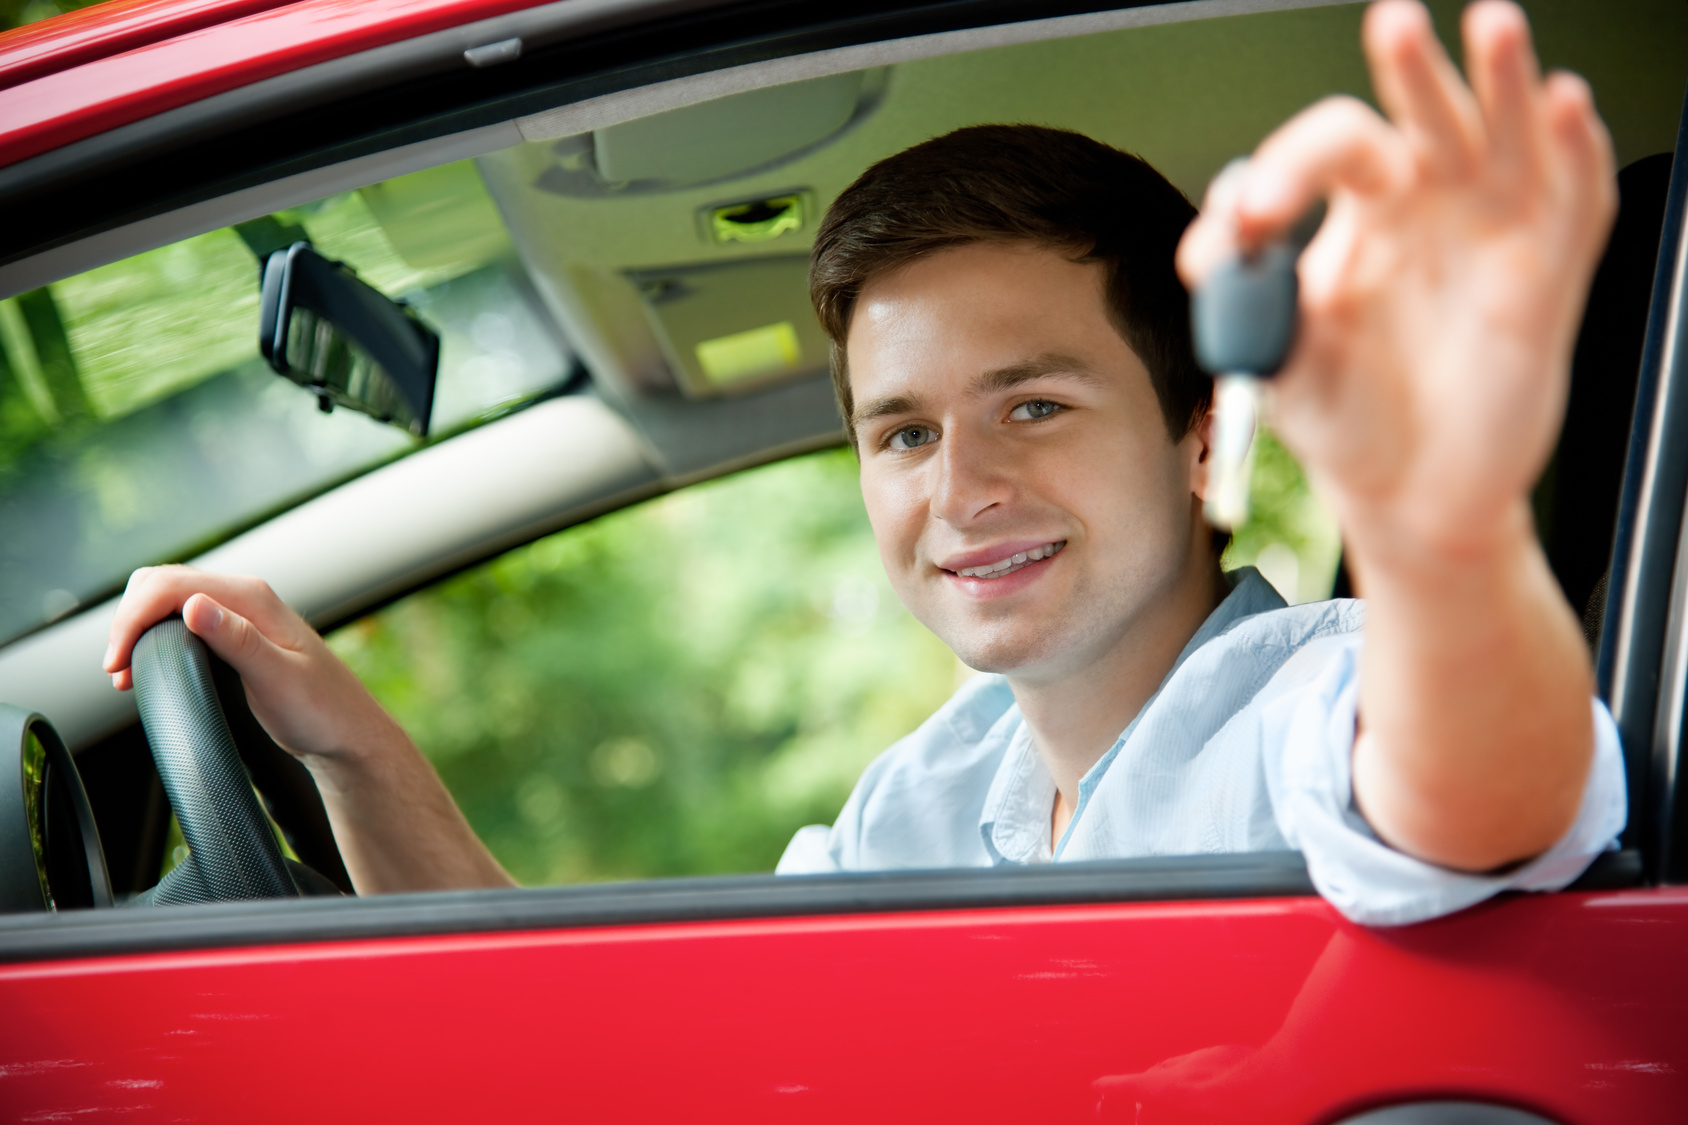 Hallmark Auto Insurance – A Trustable Company for High and Low Risk Drivers